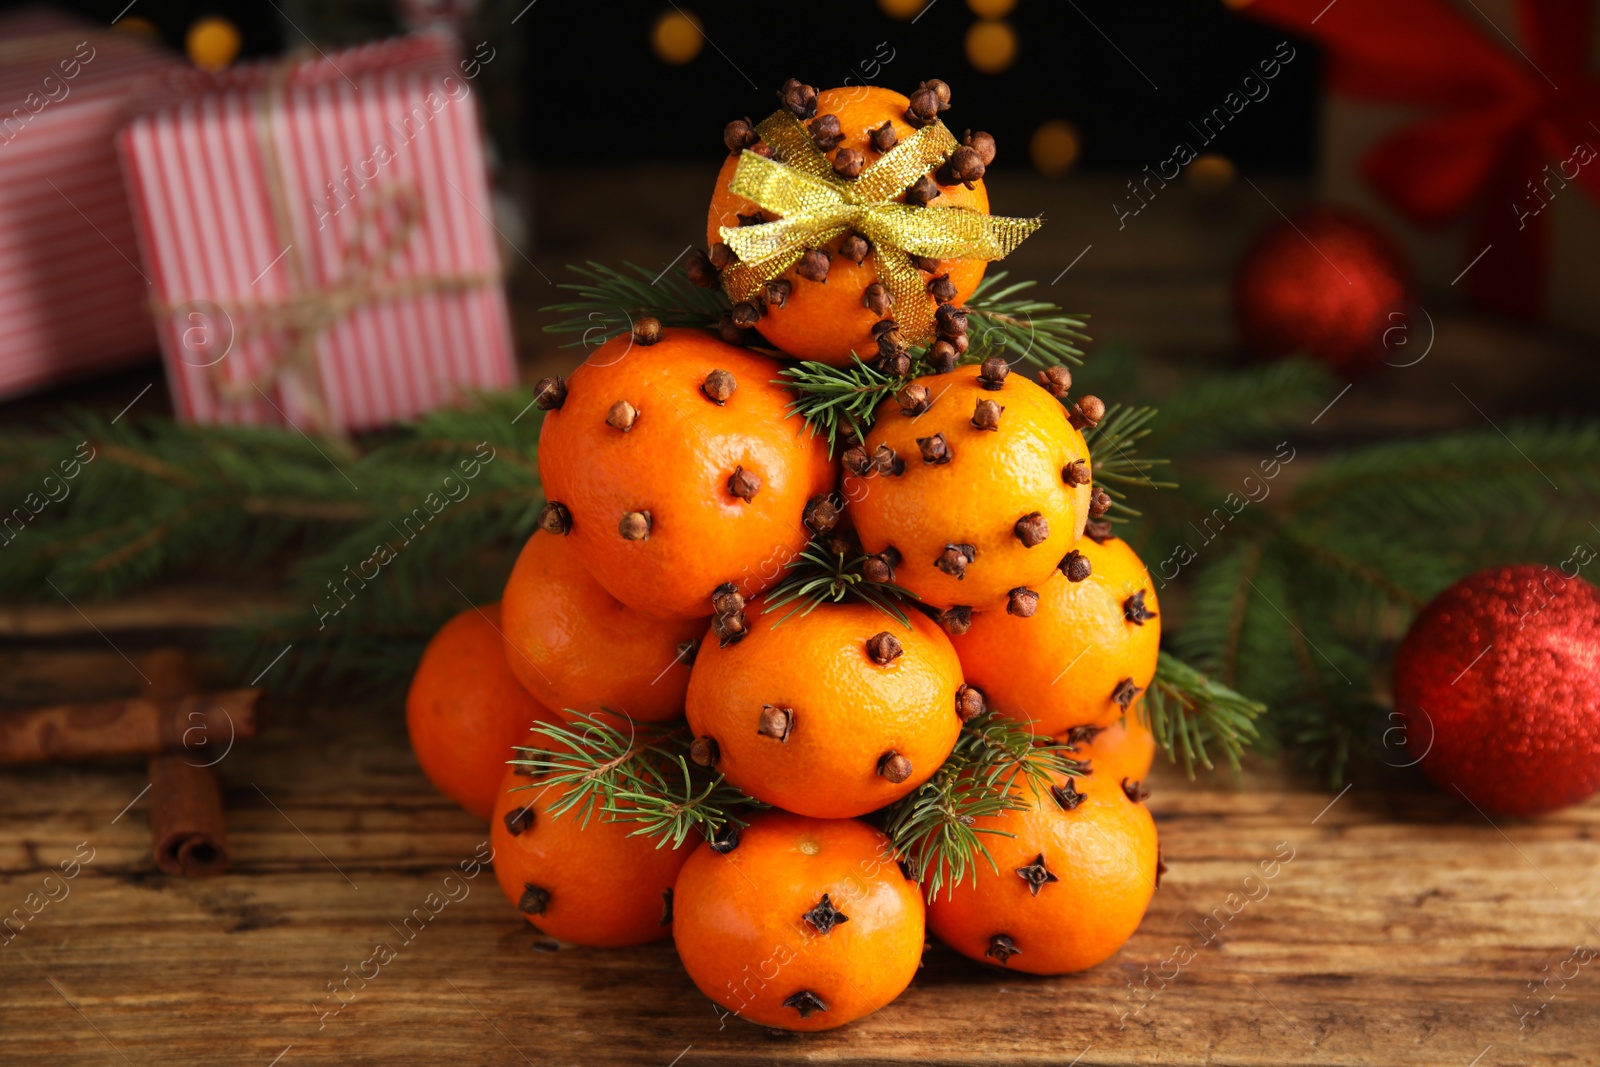 Photo of Pomander balls made of tangerines with cloves and fir branches on wooden table